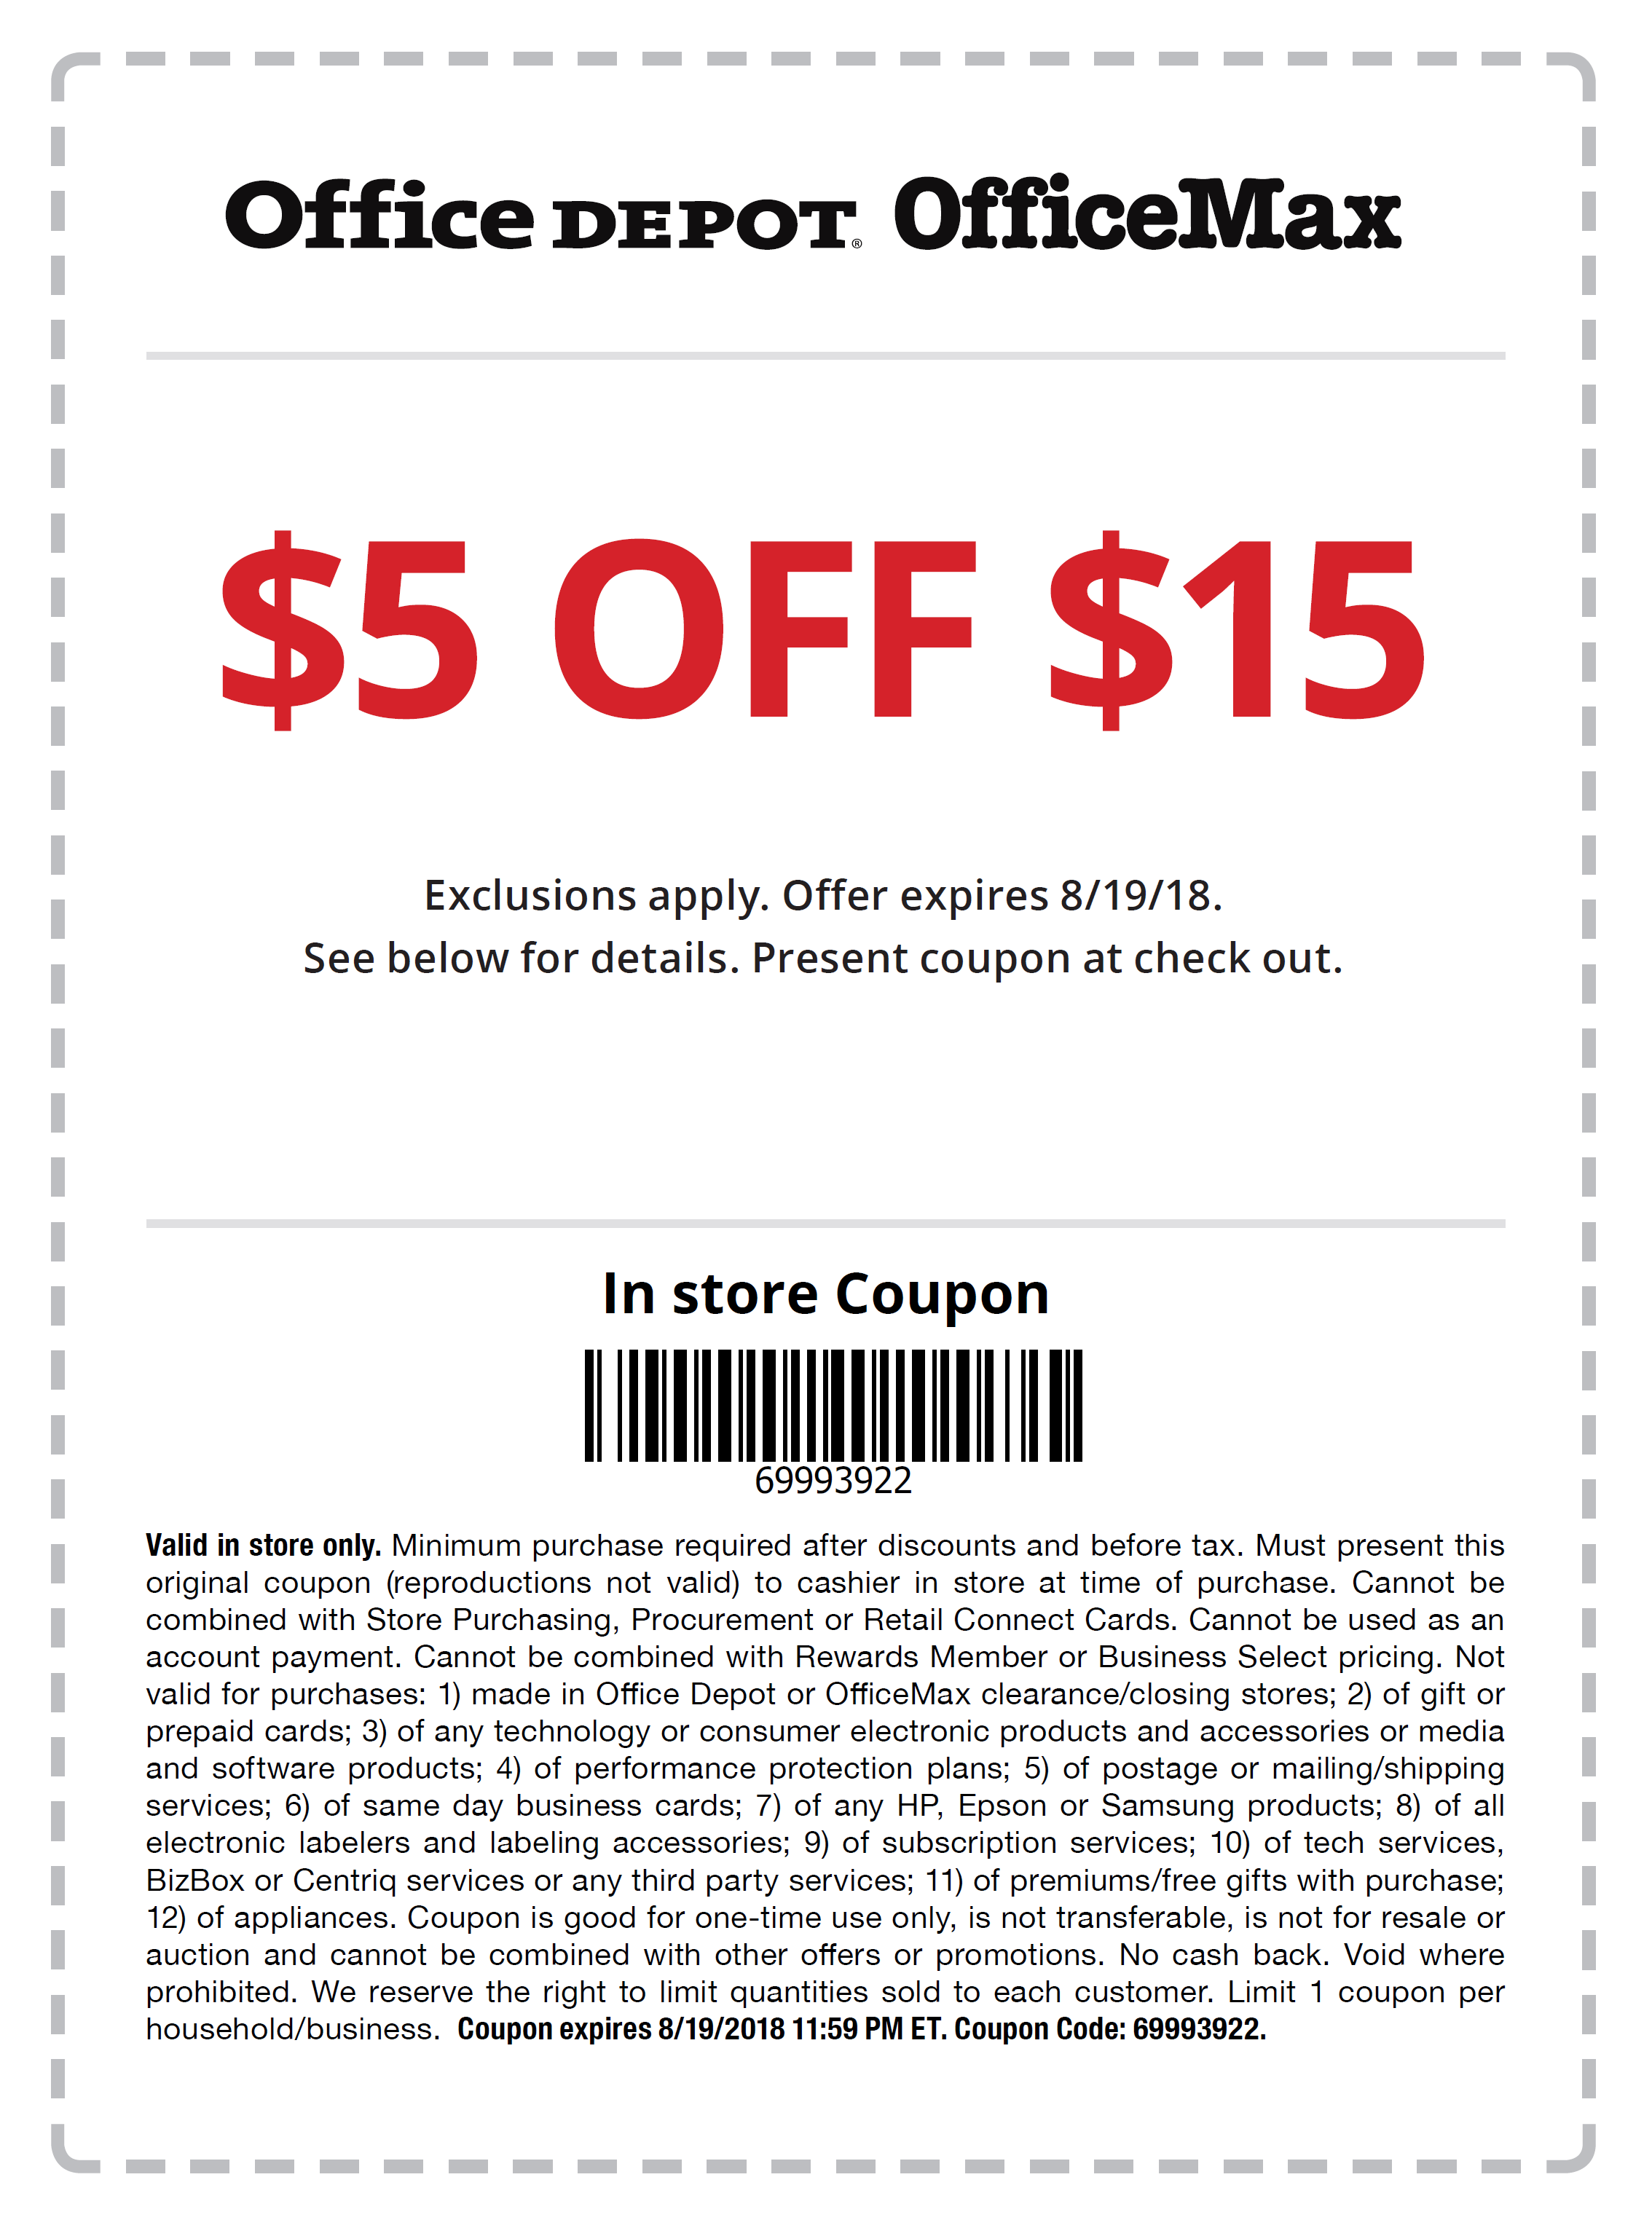 $5 off $15 In-Store Coupon @ Office Depot Office Max | PhatWallet